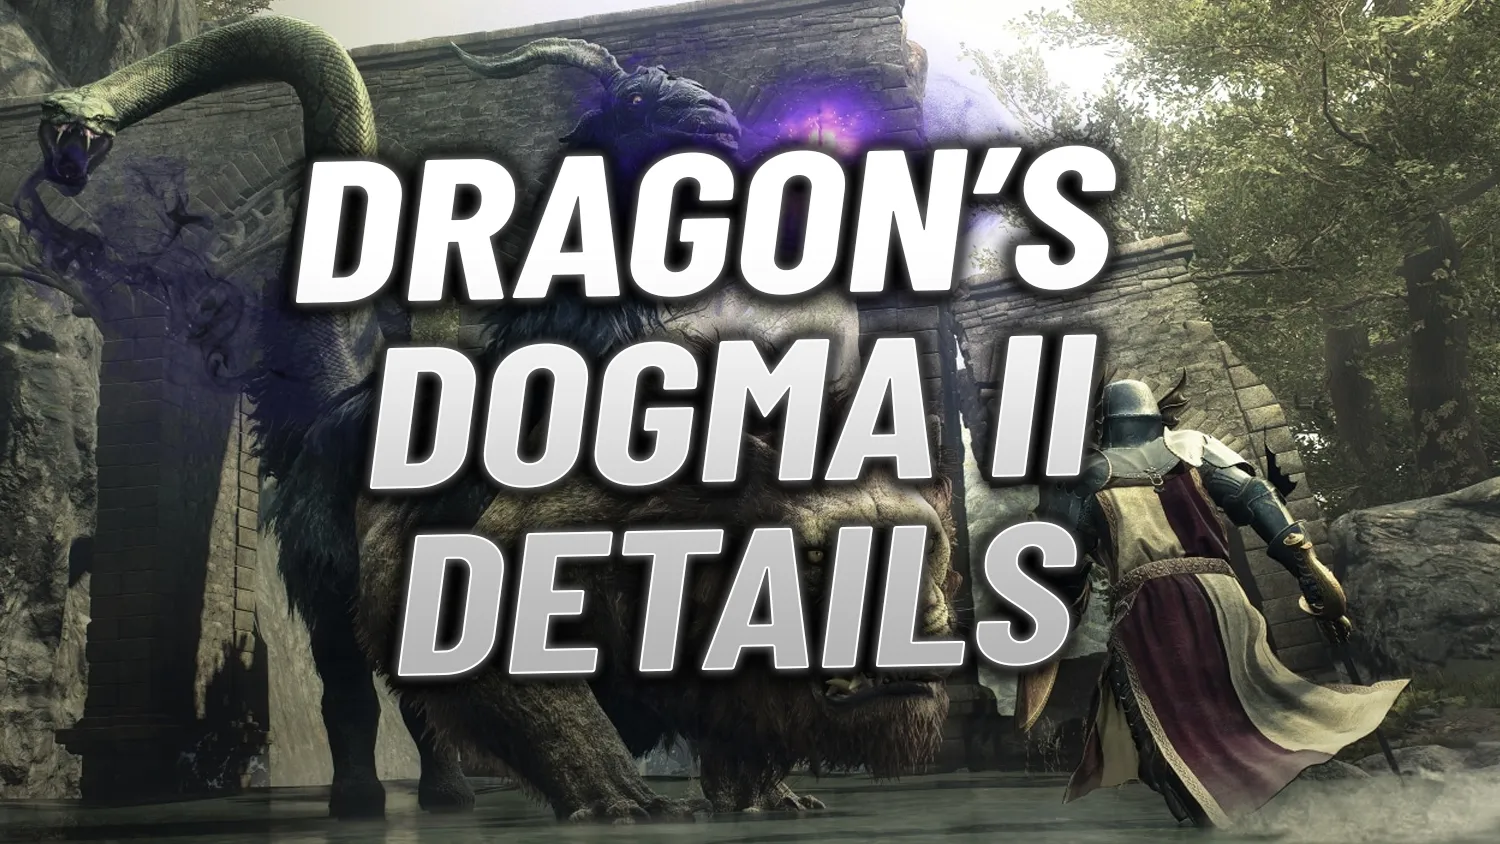 Dragon Dogma 2 Different Editions Revealed; Pre-Orders Now Live With Bonuses